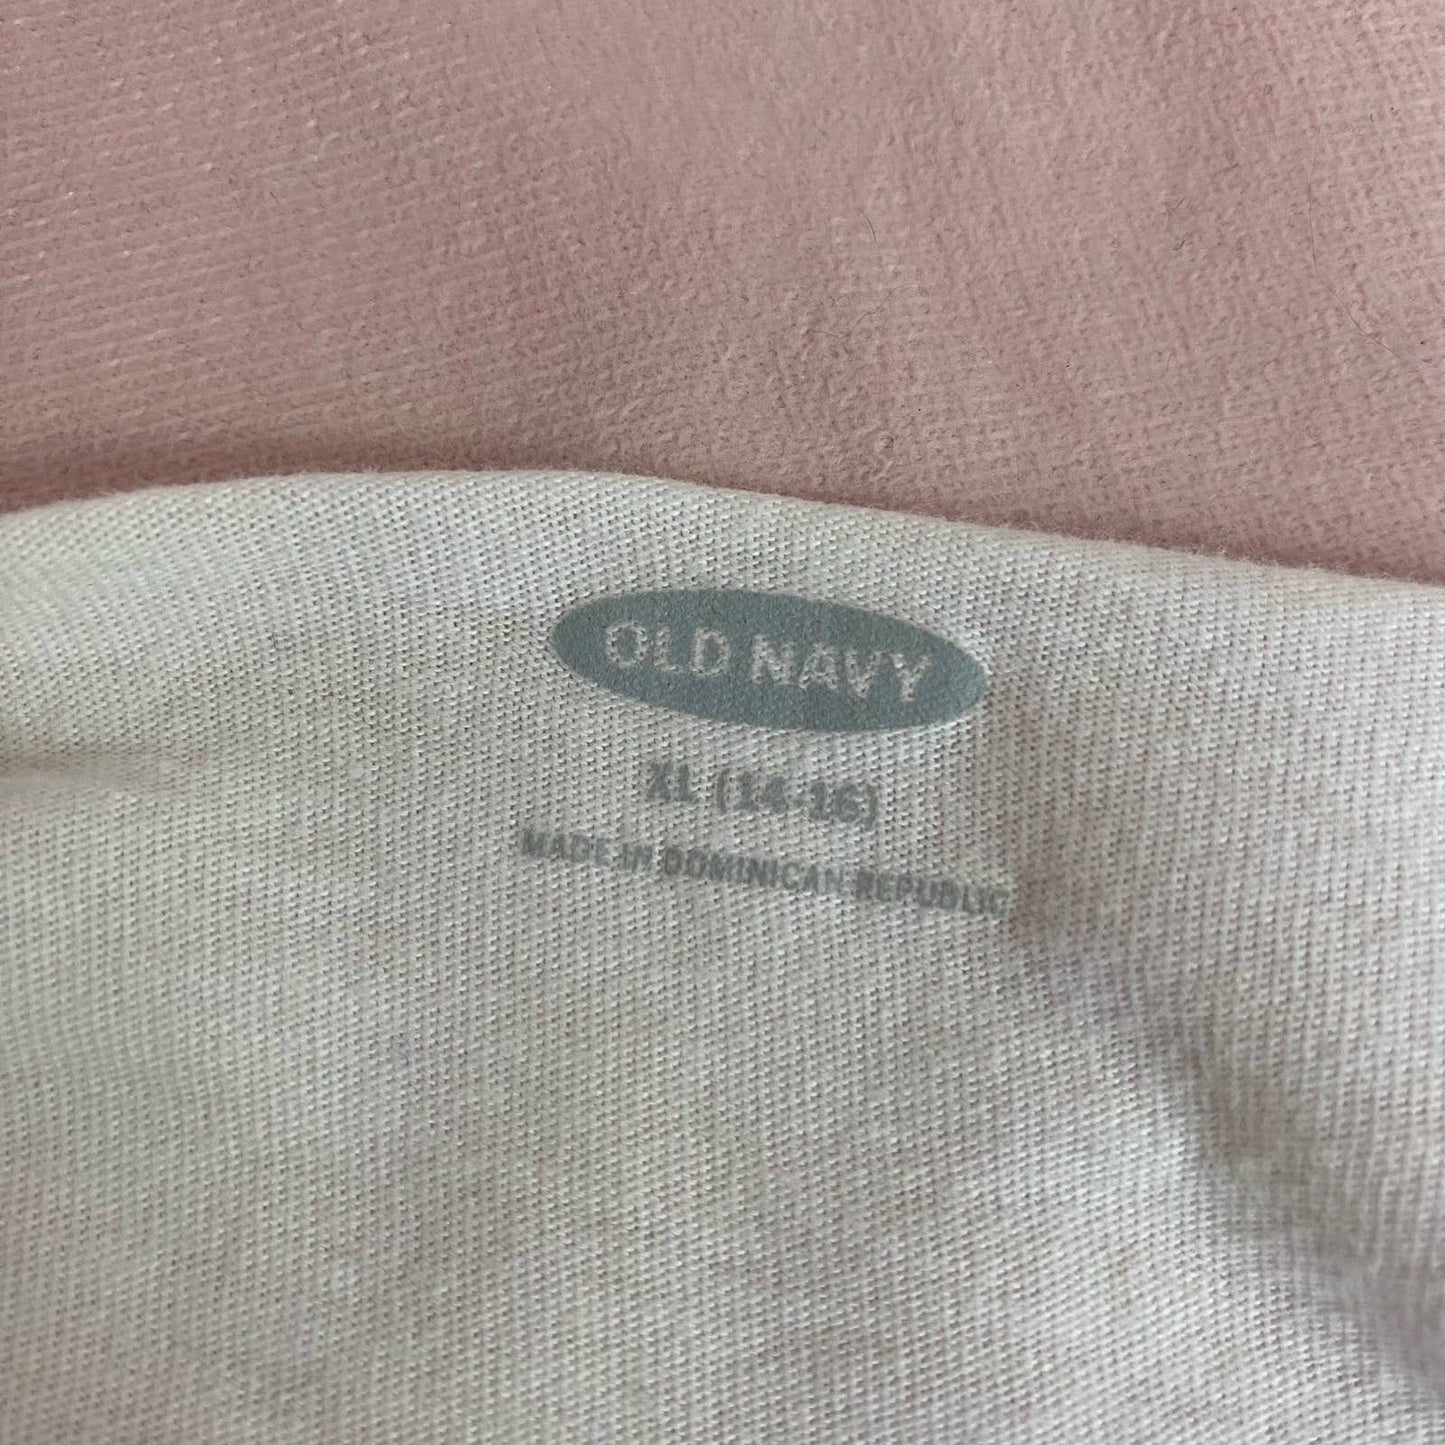 Reworked Old Navy Better Together Crop Tee, Size Small